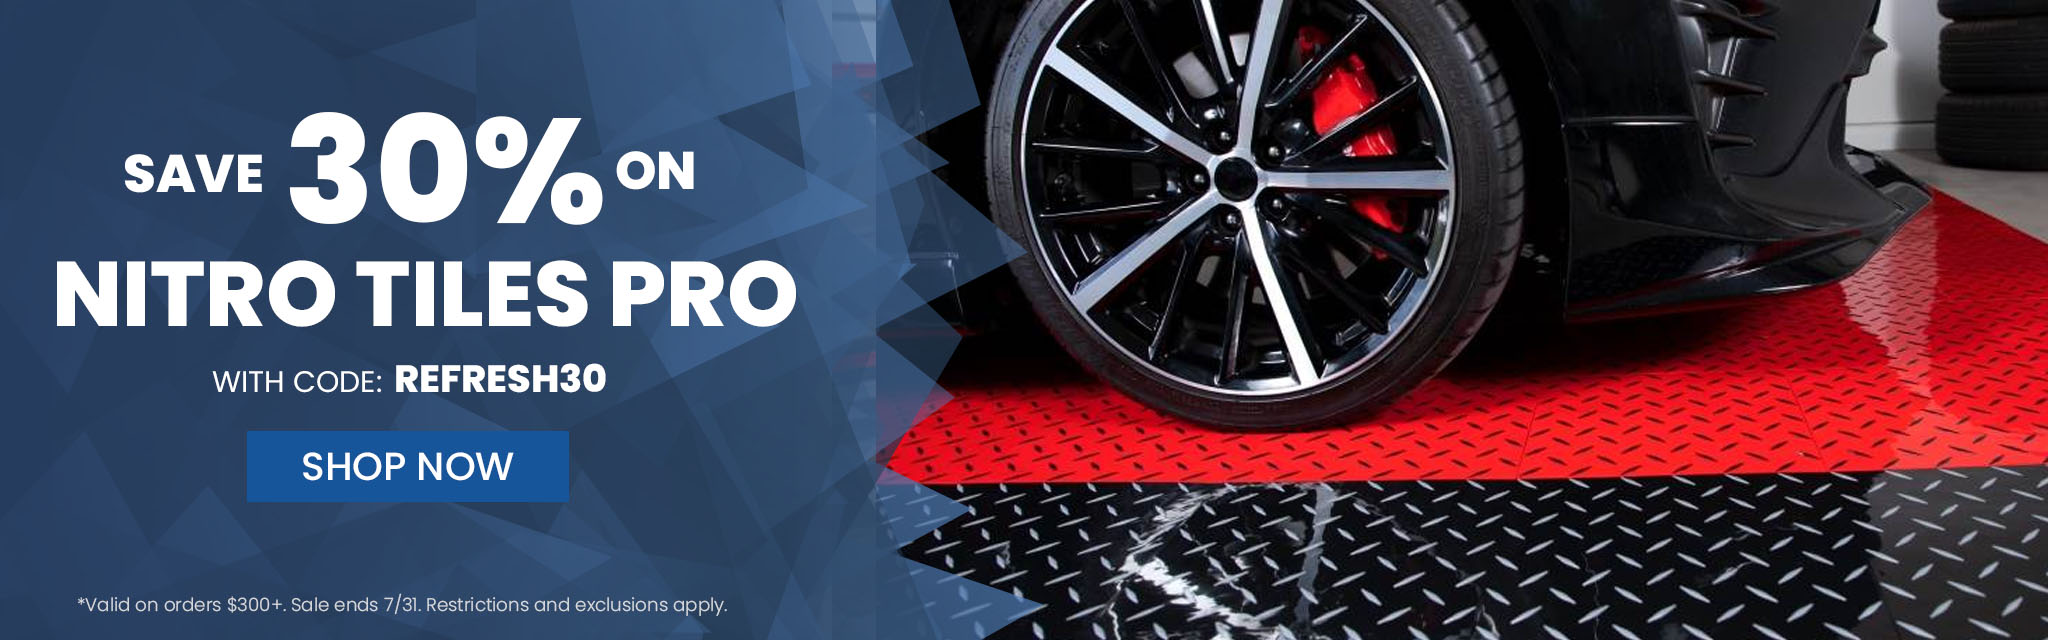 Save 30%* On Your Nitro Tiles Pro Order | Use Code: BETTER30 | Shop Now *Valid on orders $300+. Sale ends 7/31. Restrictions and exclusions apply. 